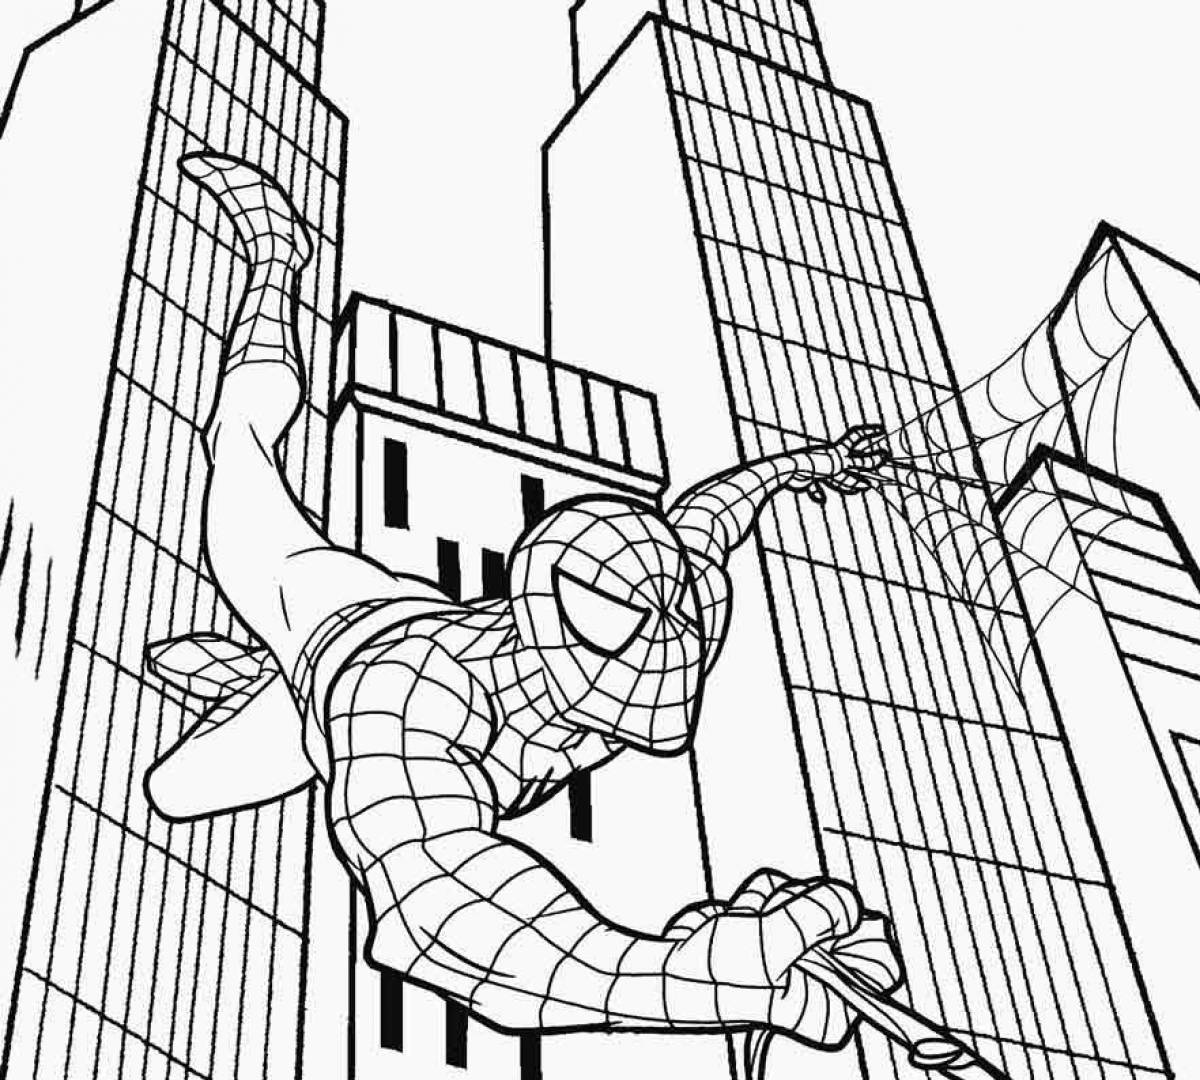 Spider-man shiny coloring book